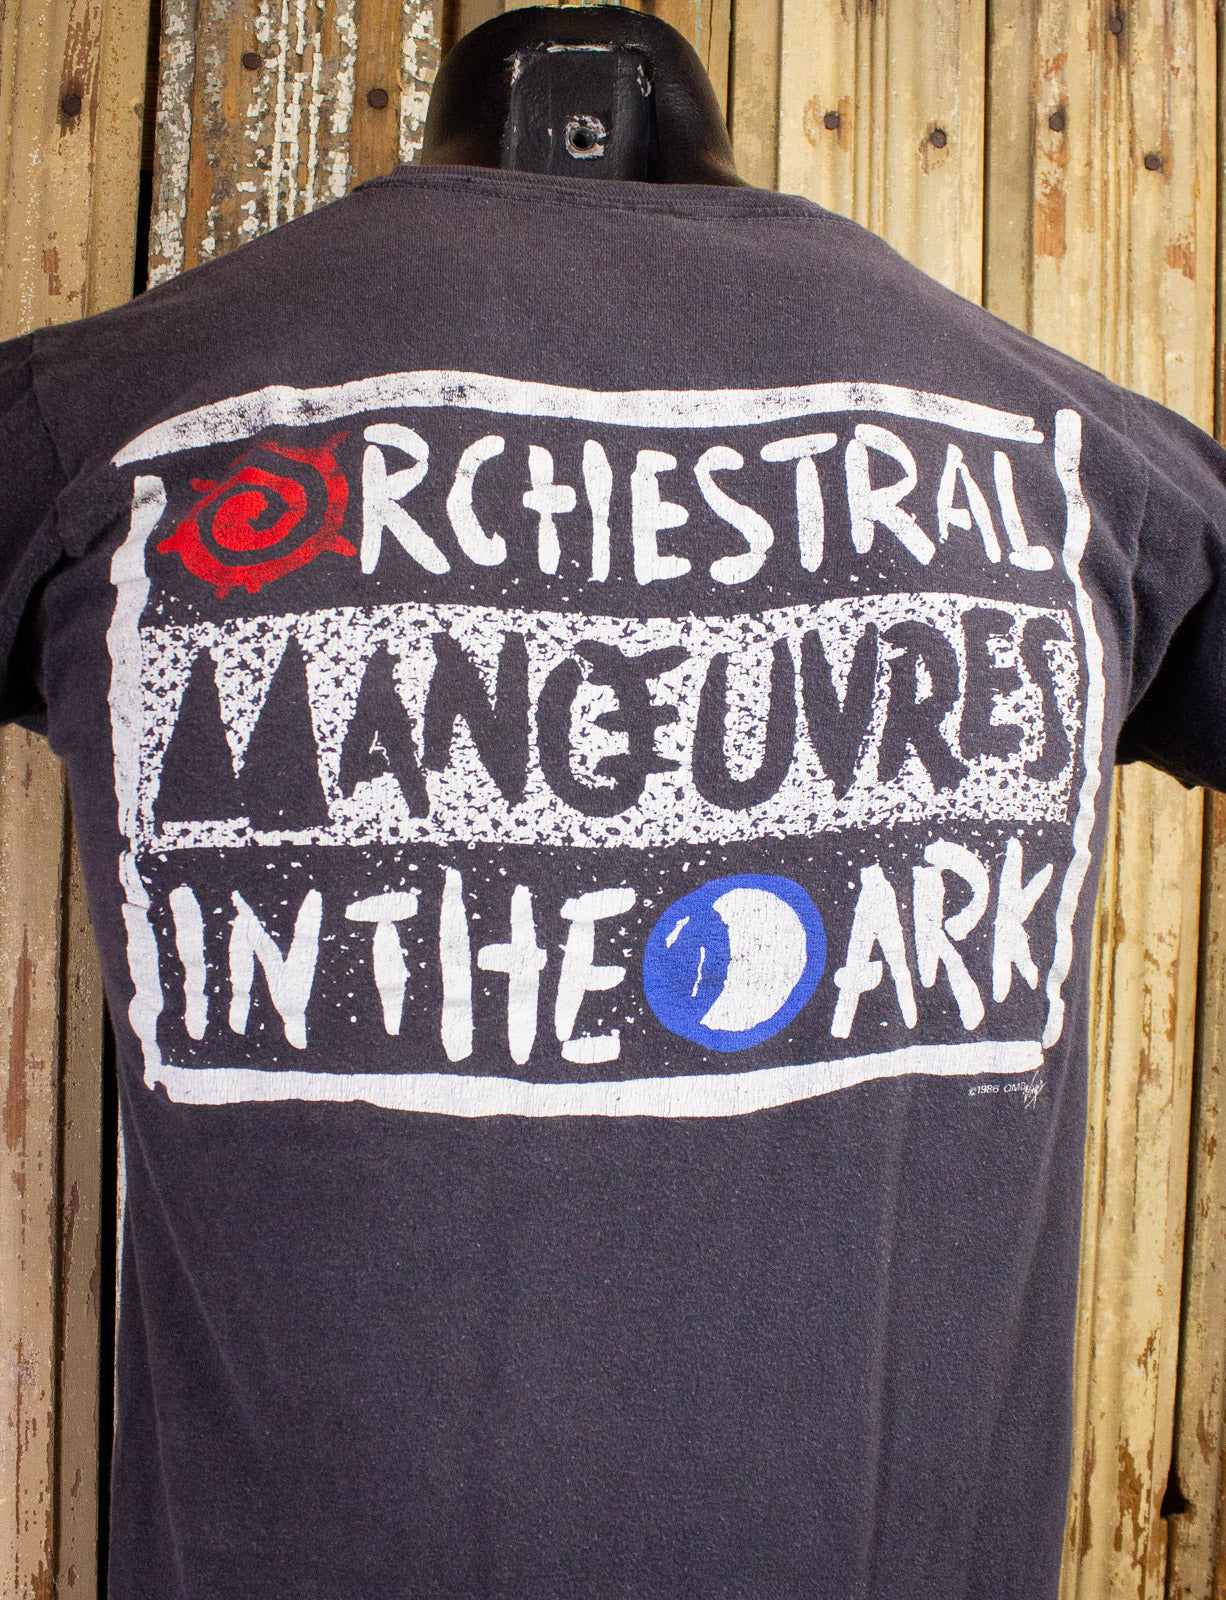 Vintage Orchestral Manoeuvres in the Dark Concert T Shirt 1986 Black Small